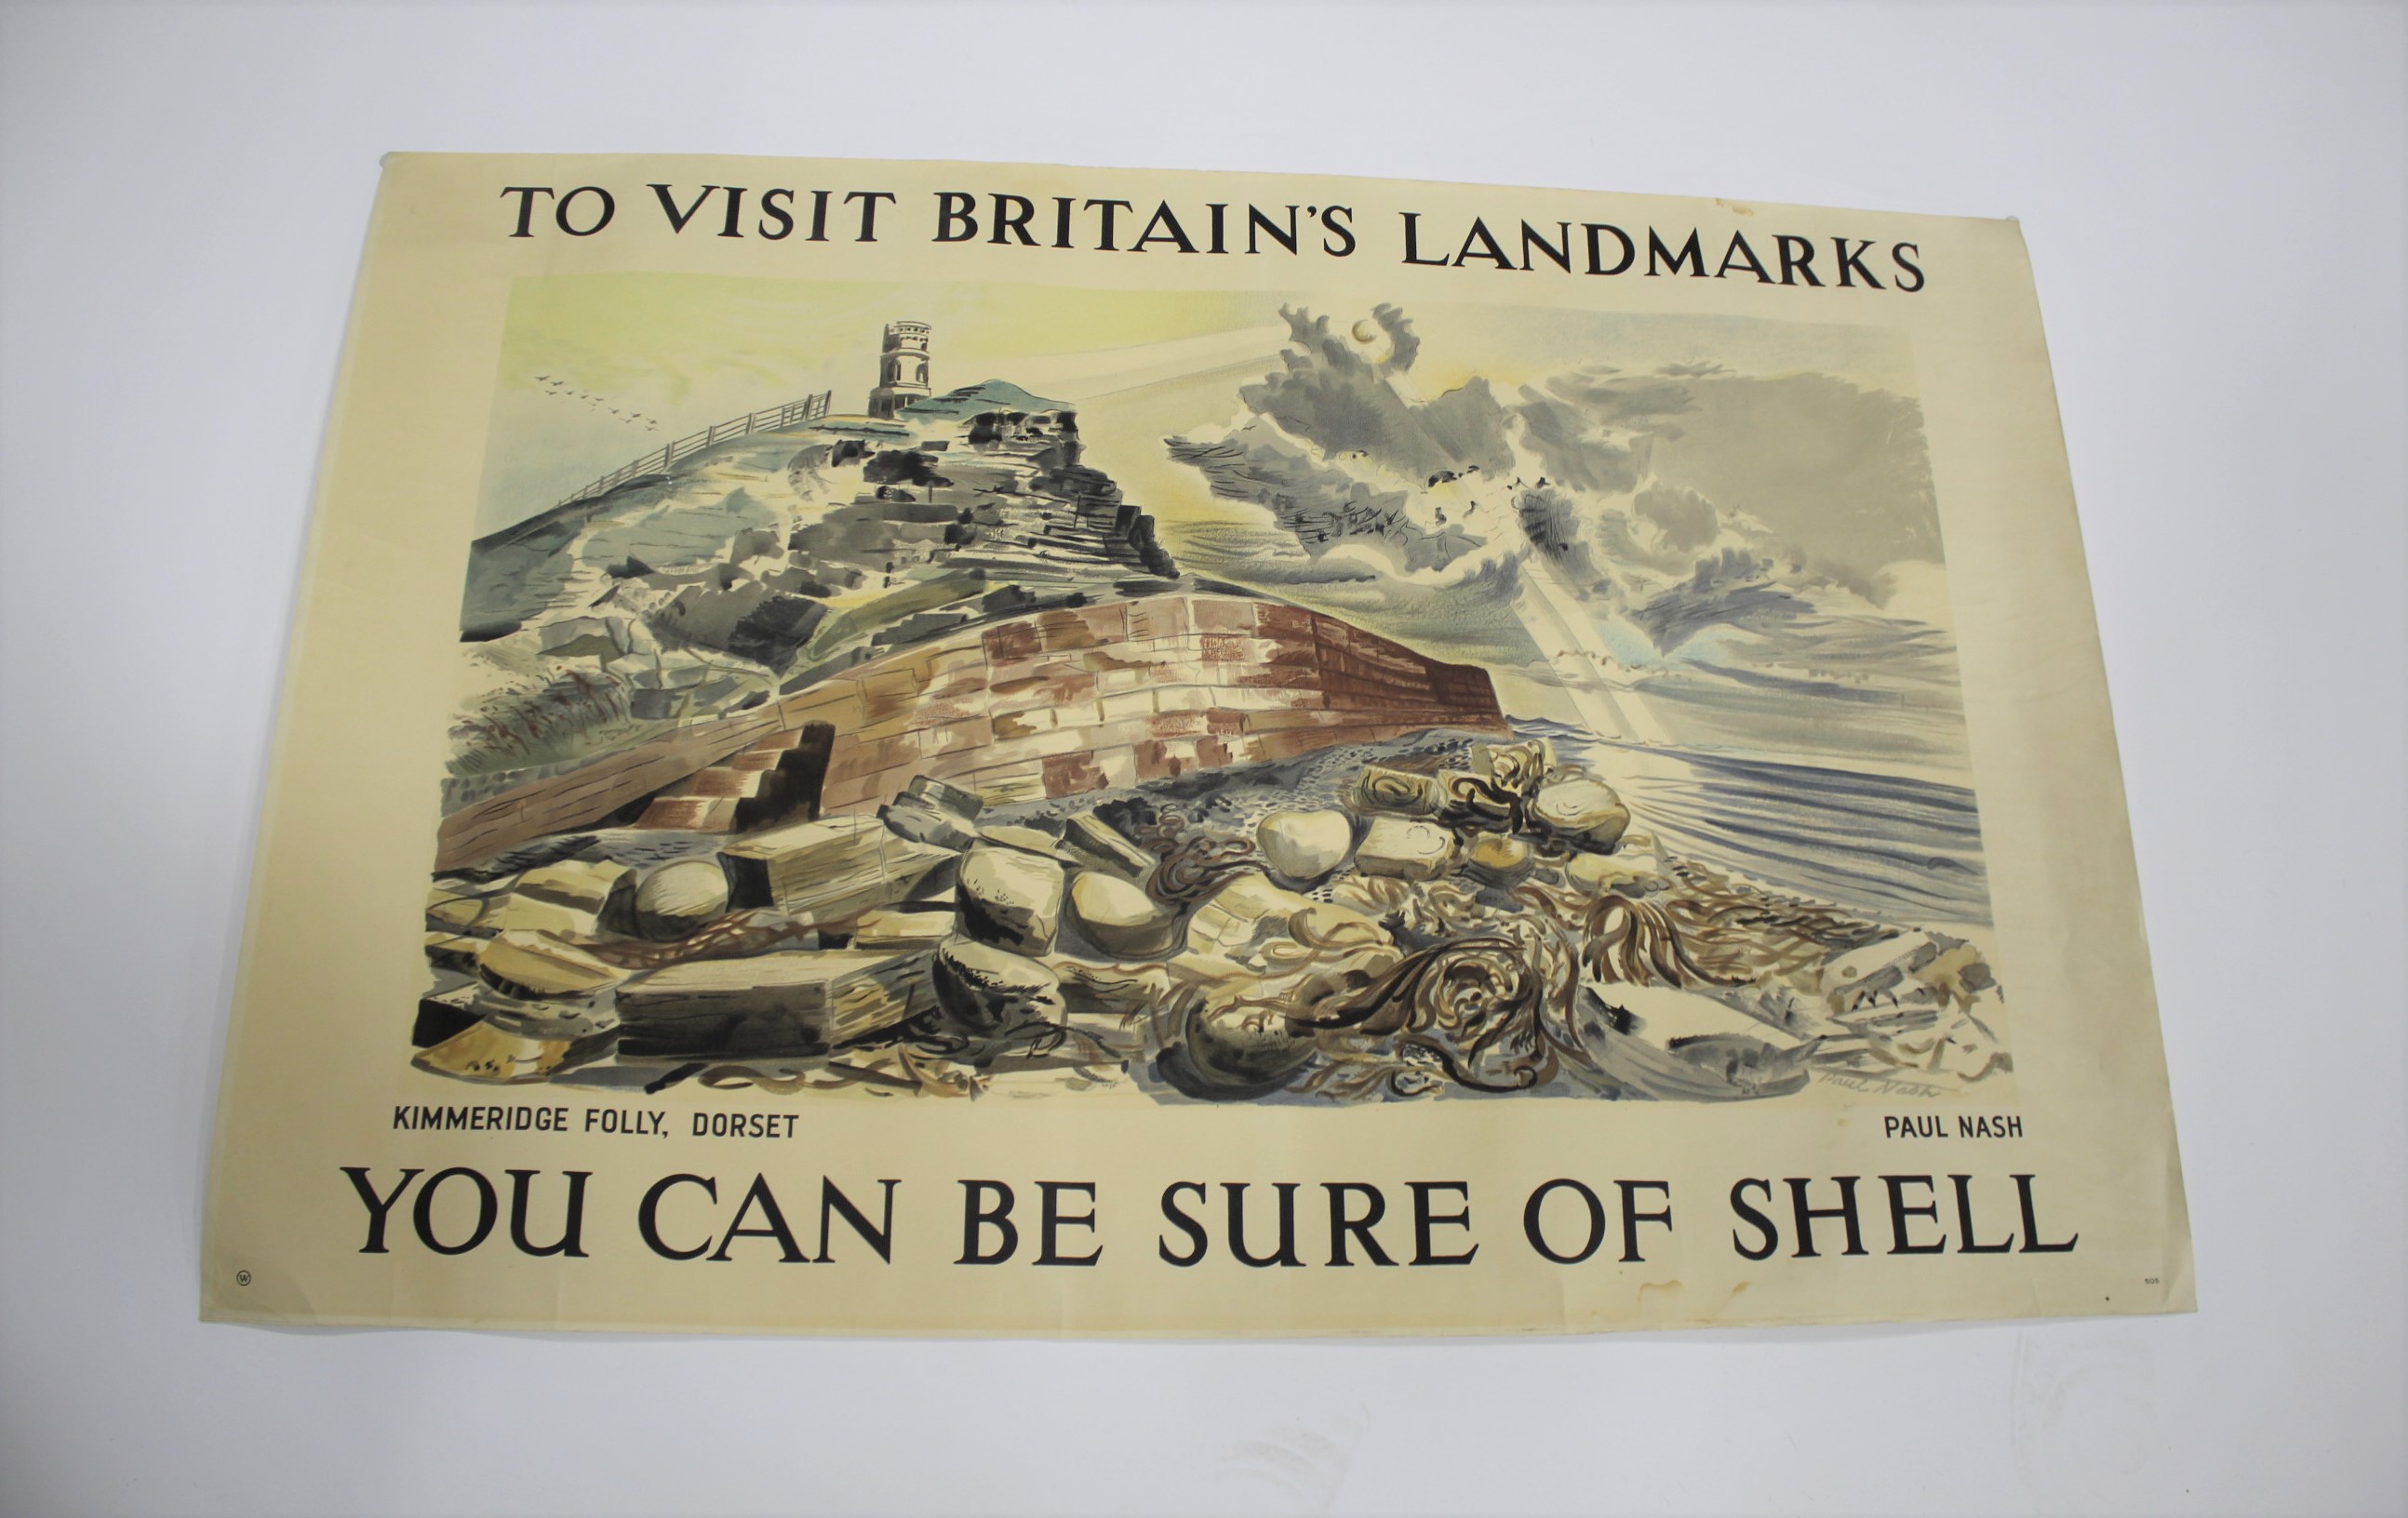 PAUL NASH (1889-1946) - SHELL POSTER 'KIMMERIDGE FOLLY', DORSET a rare lithograph in colours of - Image 2 of 7